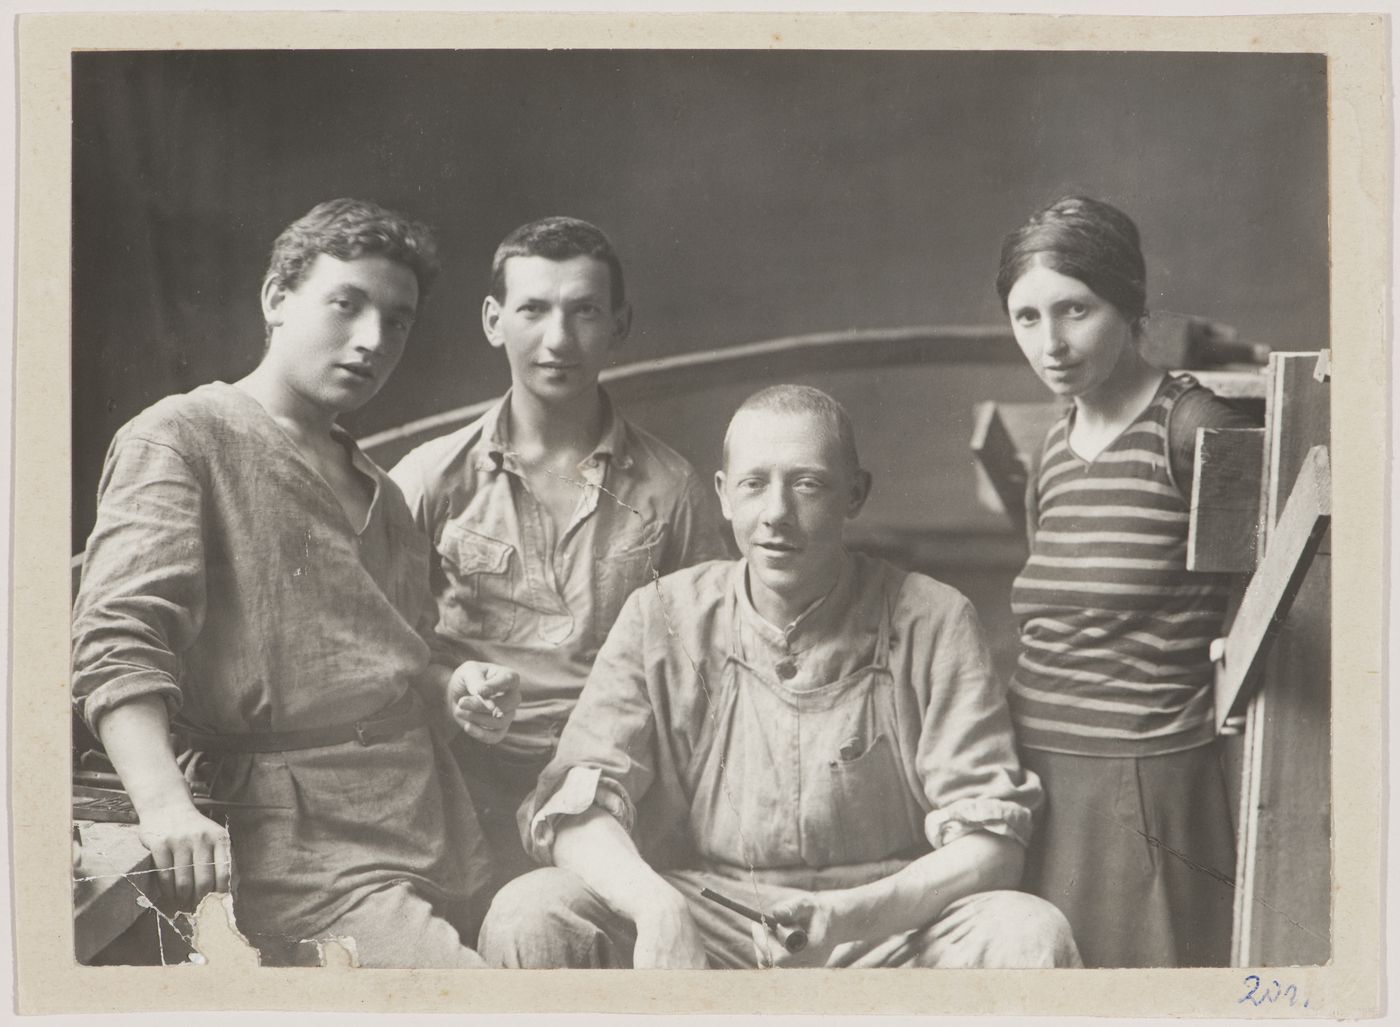 Group portrait of Vladimir Tatlin and his assistants I.A. Meerzon, T.M. Shapiro and S. Dymshits-Tolstaia at the time of the construction of the model for the Monument to the Third International, Petrograd (now Saint Petersburg)